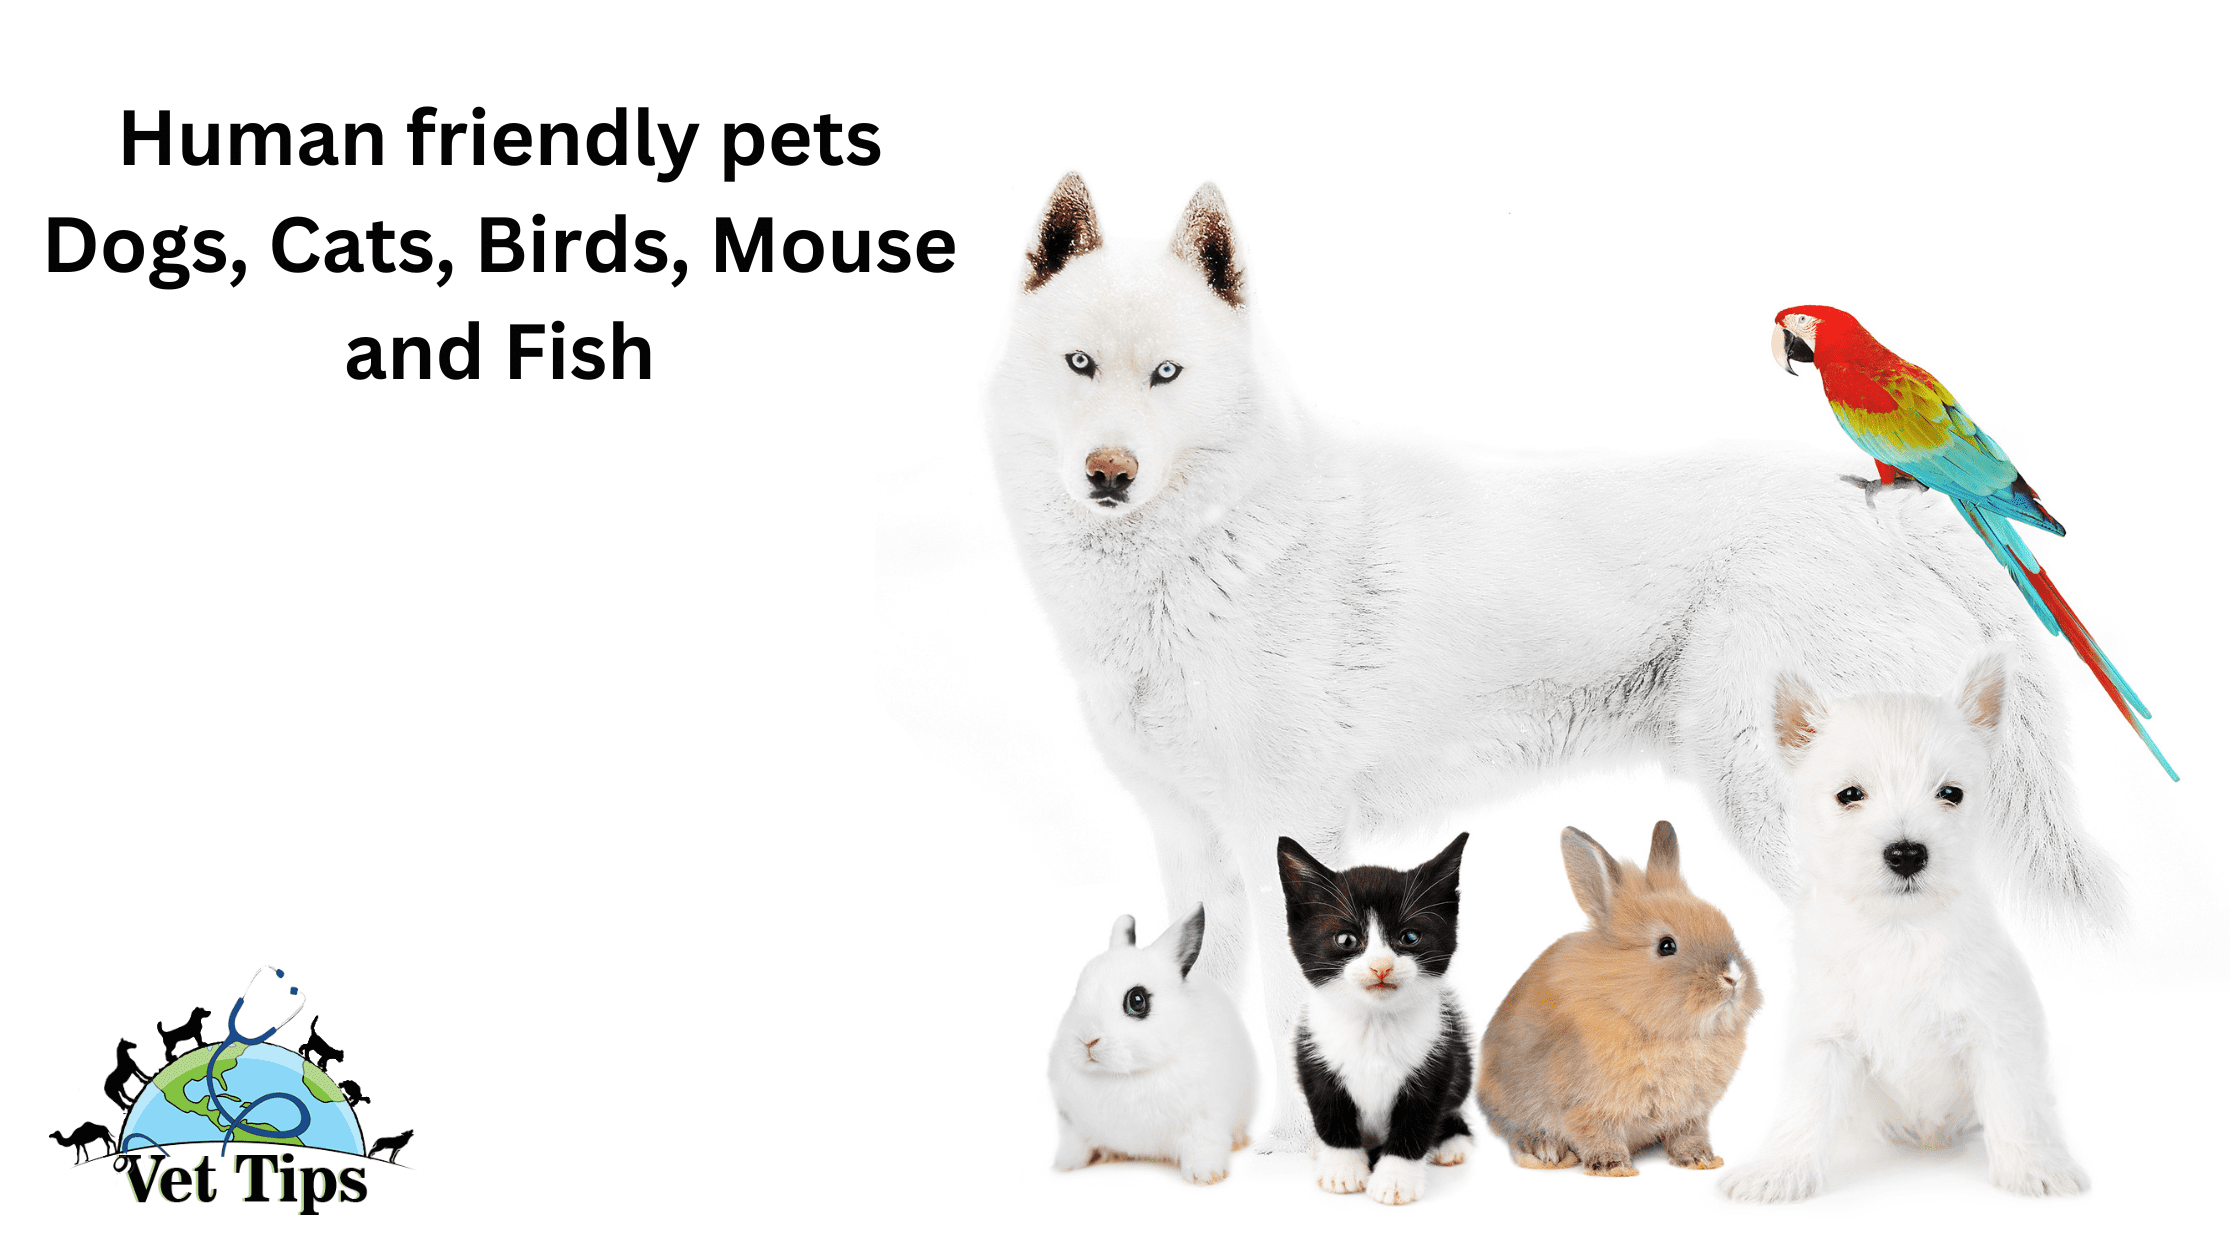 Human friendly pets Dogs, Cats, Birds, Mouse and Fish